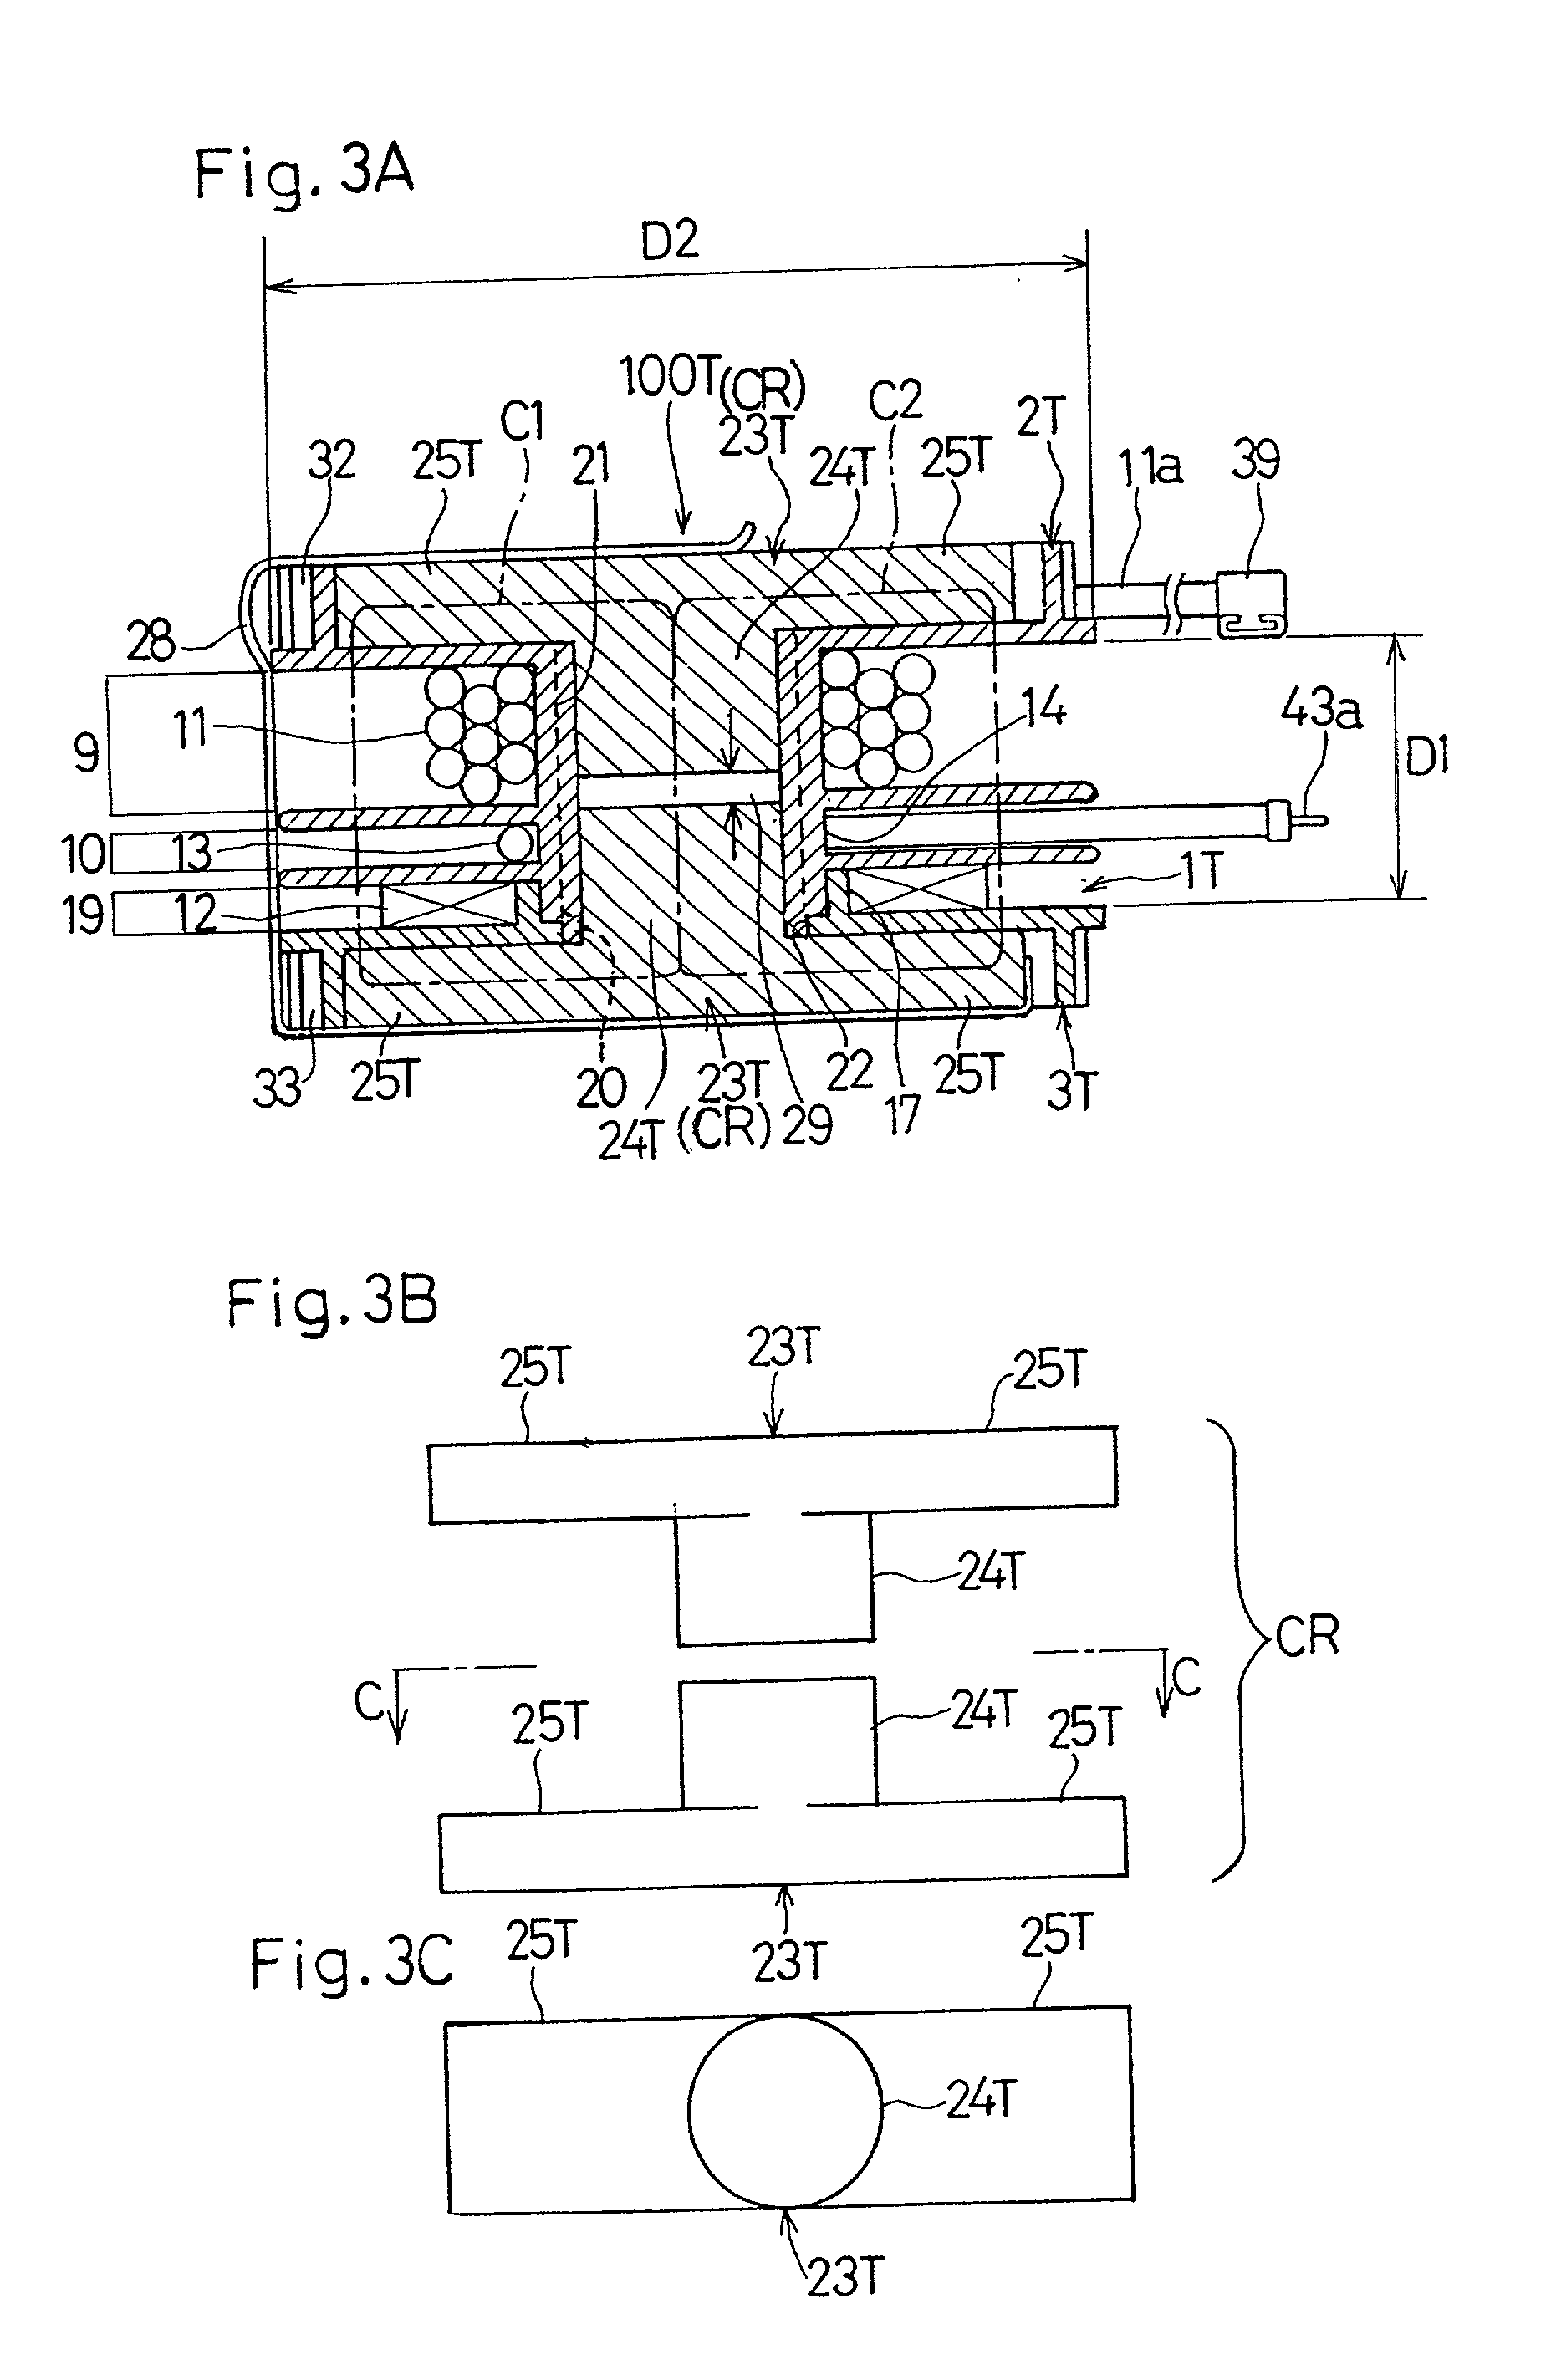 Electromagnetic induction device